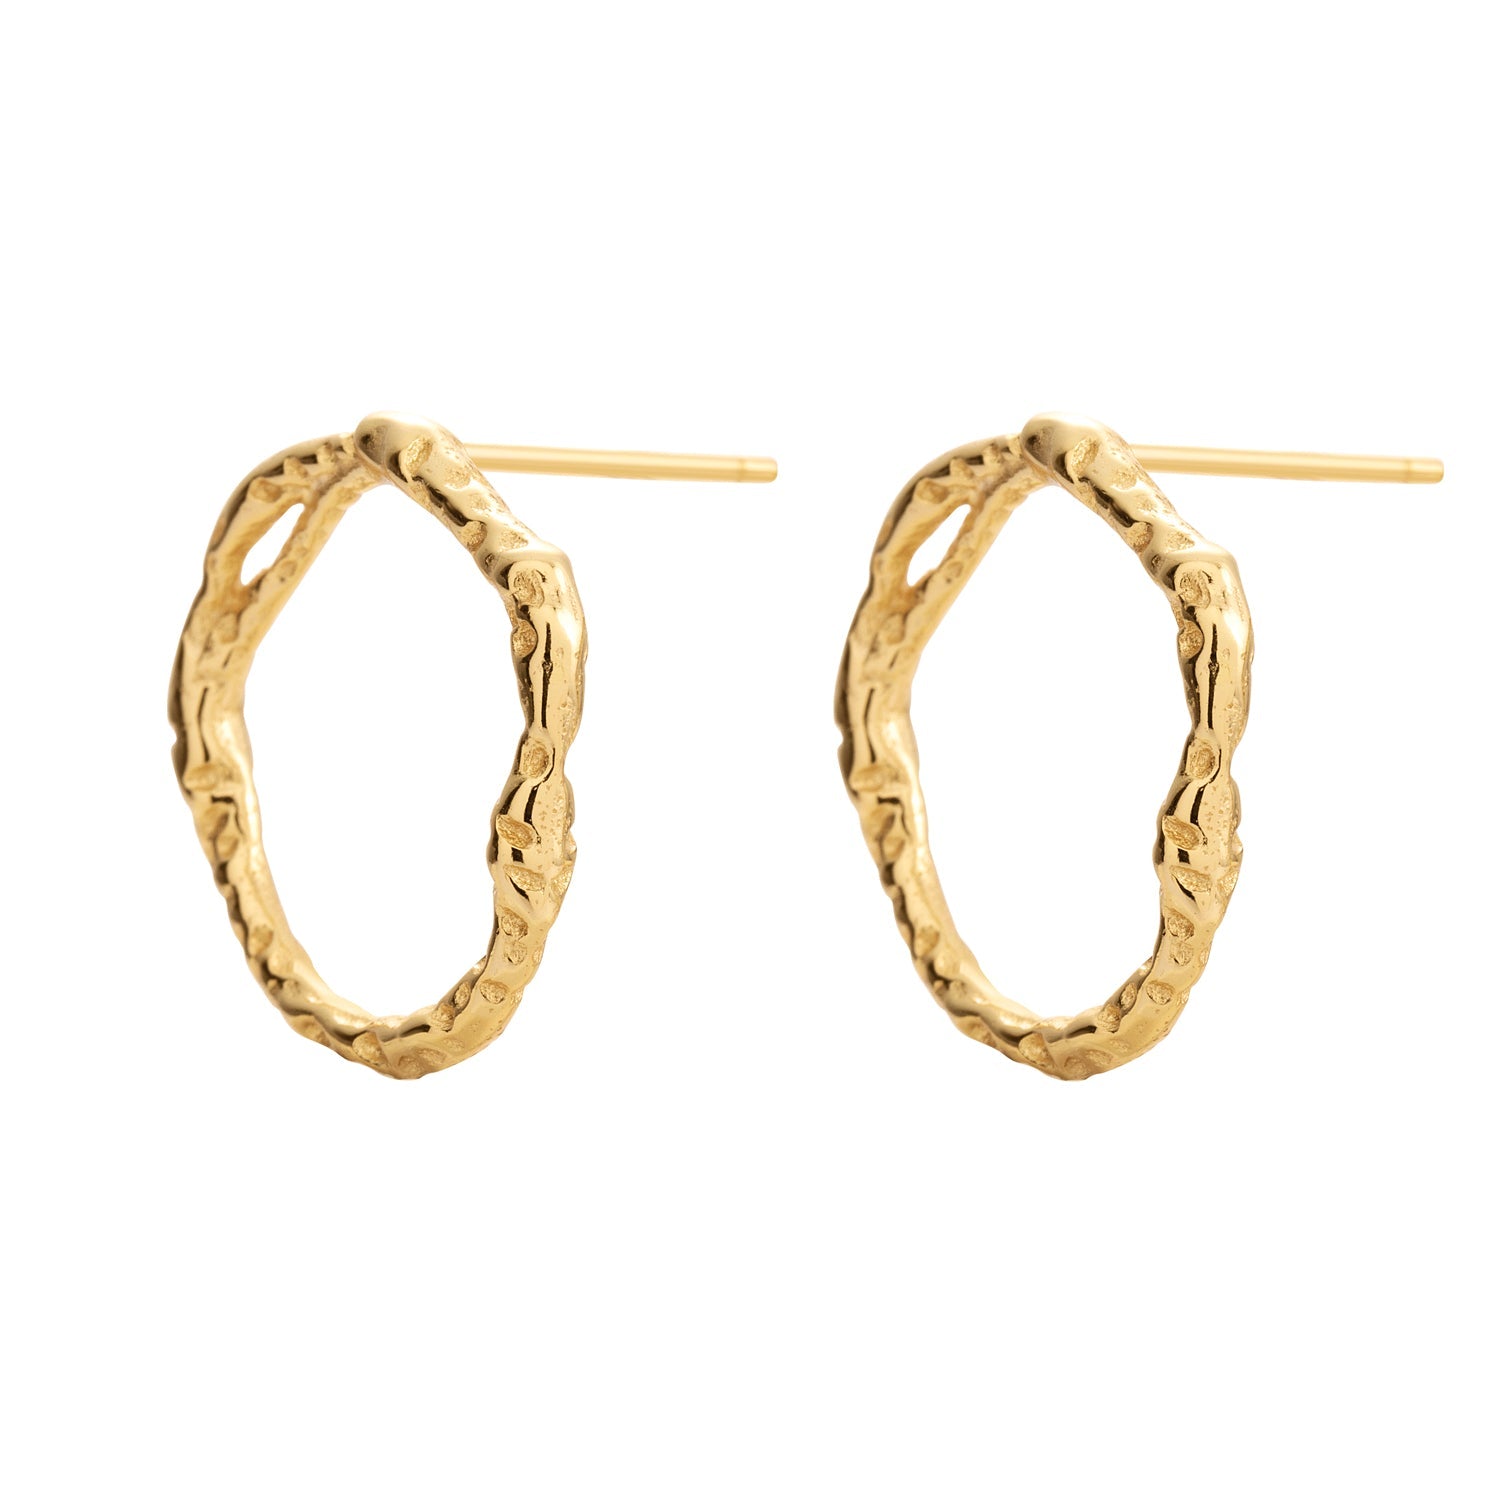 Minimalistic circle-shaped Echo golden stud earrings, made from recycled silver, 18k gold plated. Hypoallergenic, easy to wear all day. Size: 16 x 17 mm, weight: 1.1 g per earring.